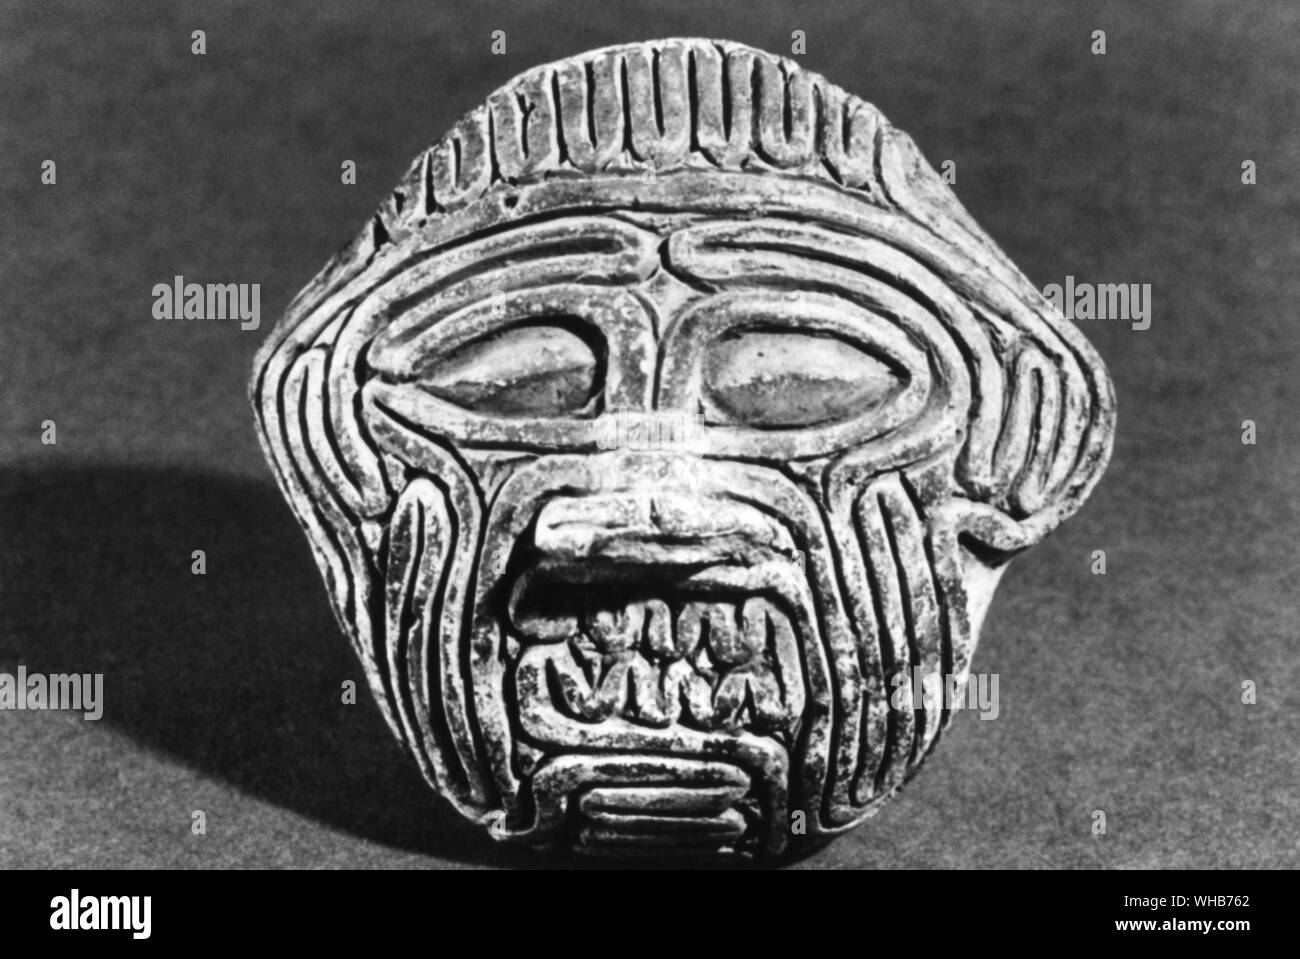 The demon Humbaba ( or Huwawa ) - god of intenstines - Humbaba semi-legendary king of Uruk ( or Erech ). - Humbaba guards the cedars of the sacred forest - . Gilgamesh killed Humbaba by cutting off his head - . Huwawa in the Old Babylonian and Hittite versions, Humbaba in the Assyrian version.. Stock Photo